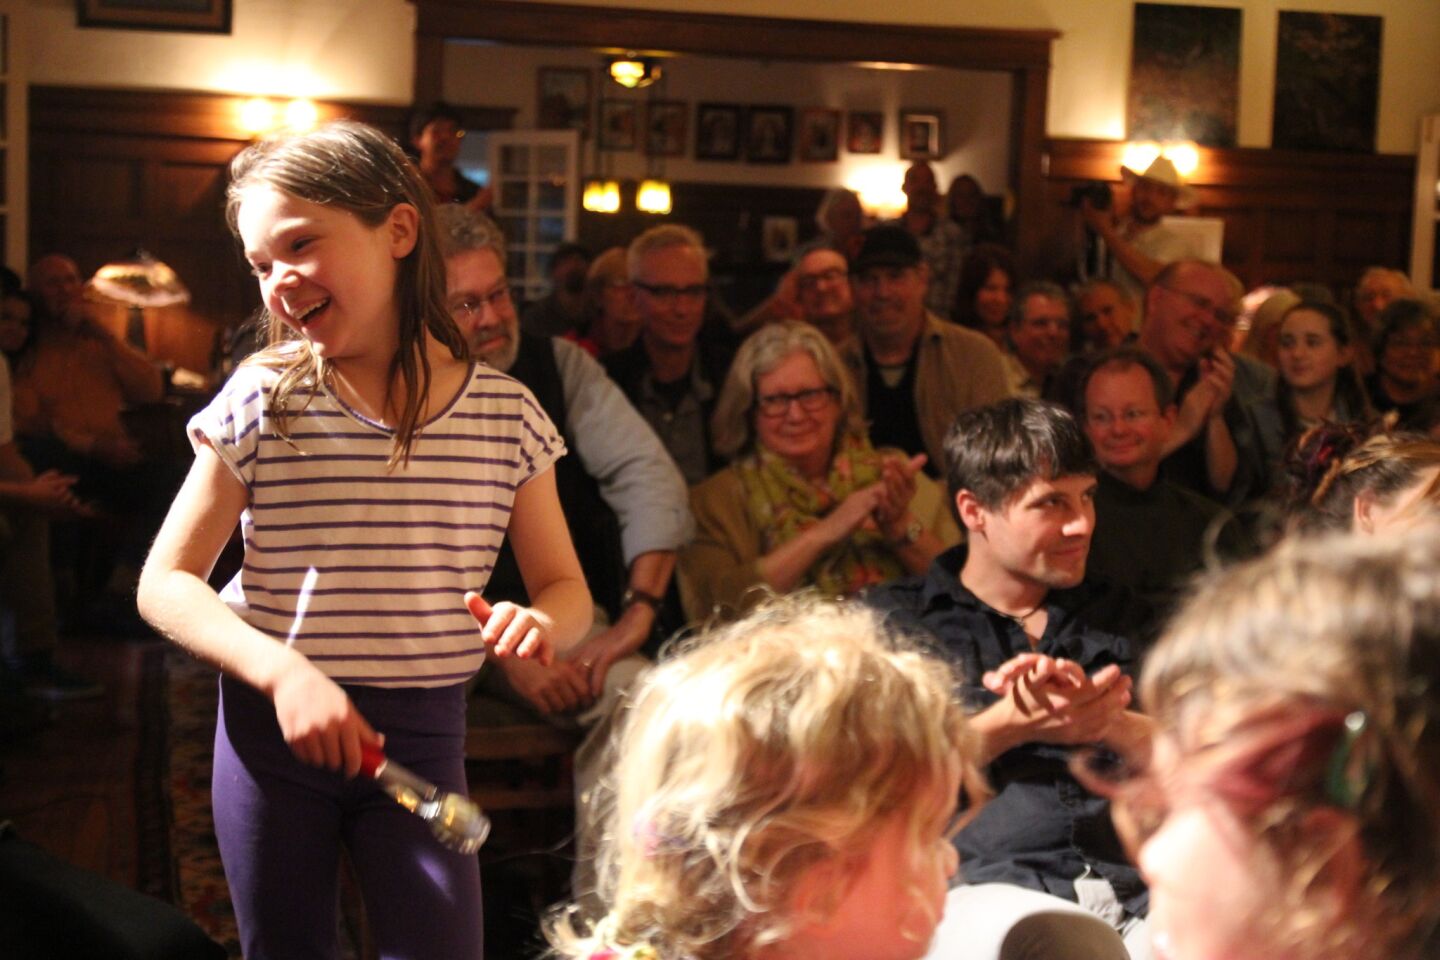 Members of the audience will sometimes join — clapping, dancing and clogging. This young girl plays the spoons.